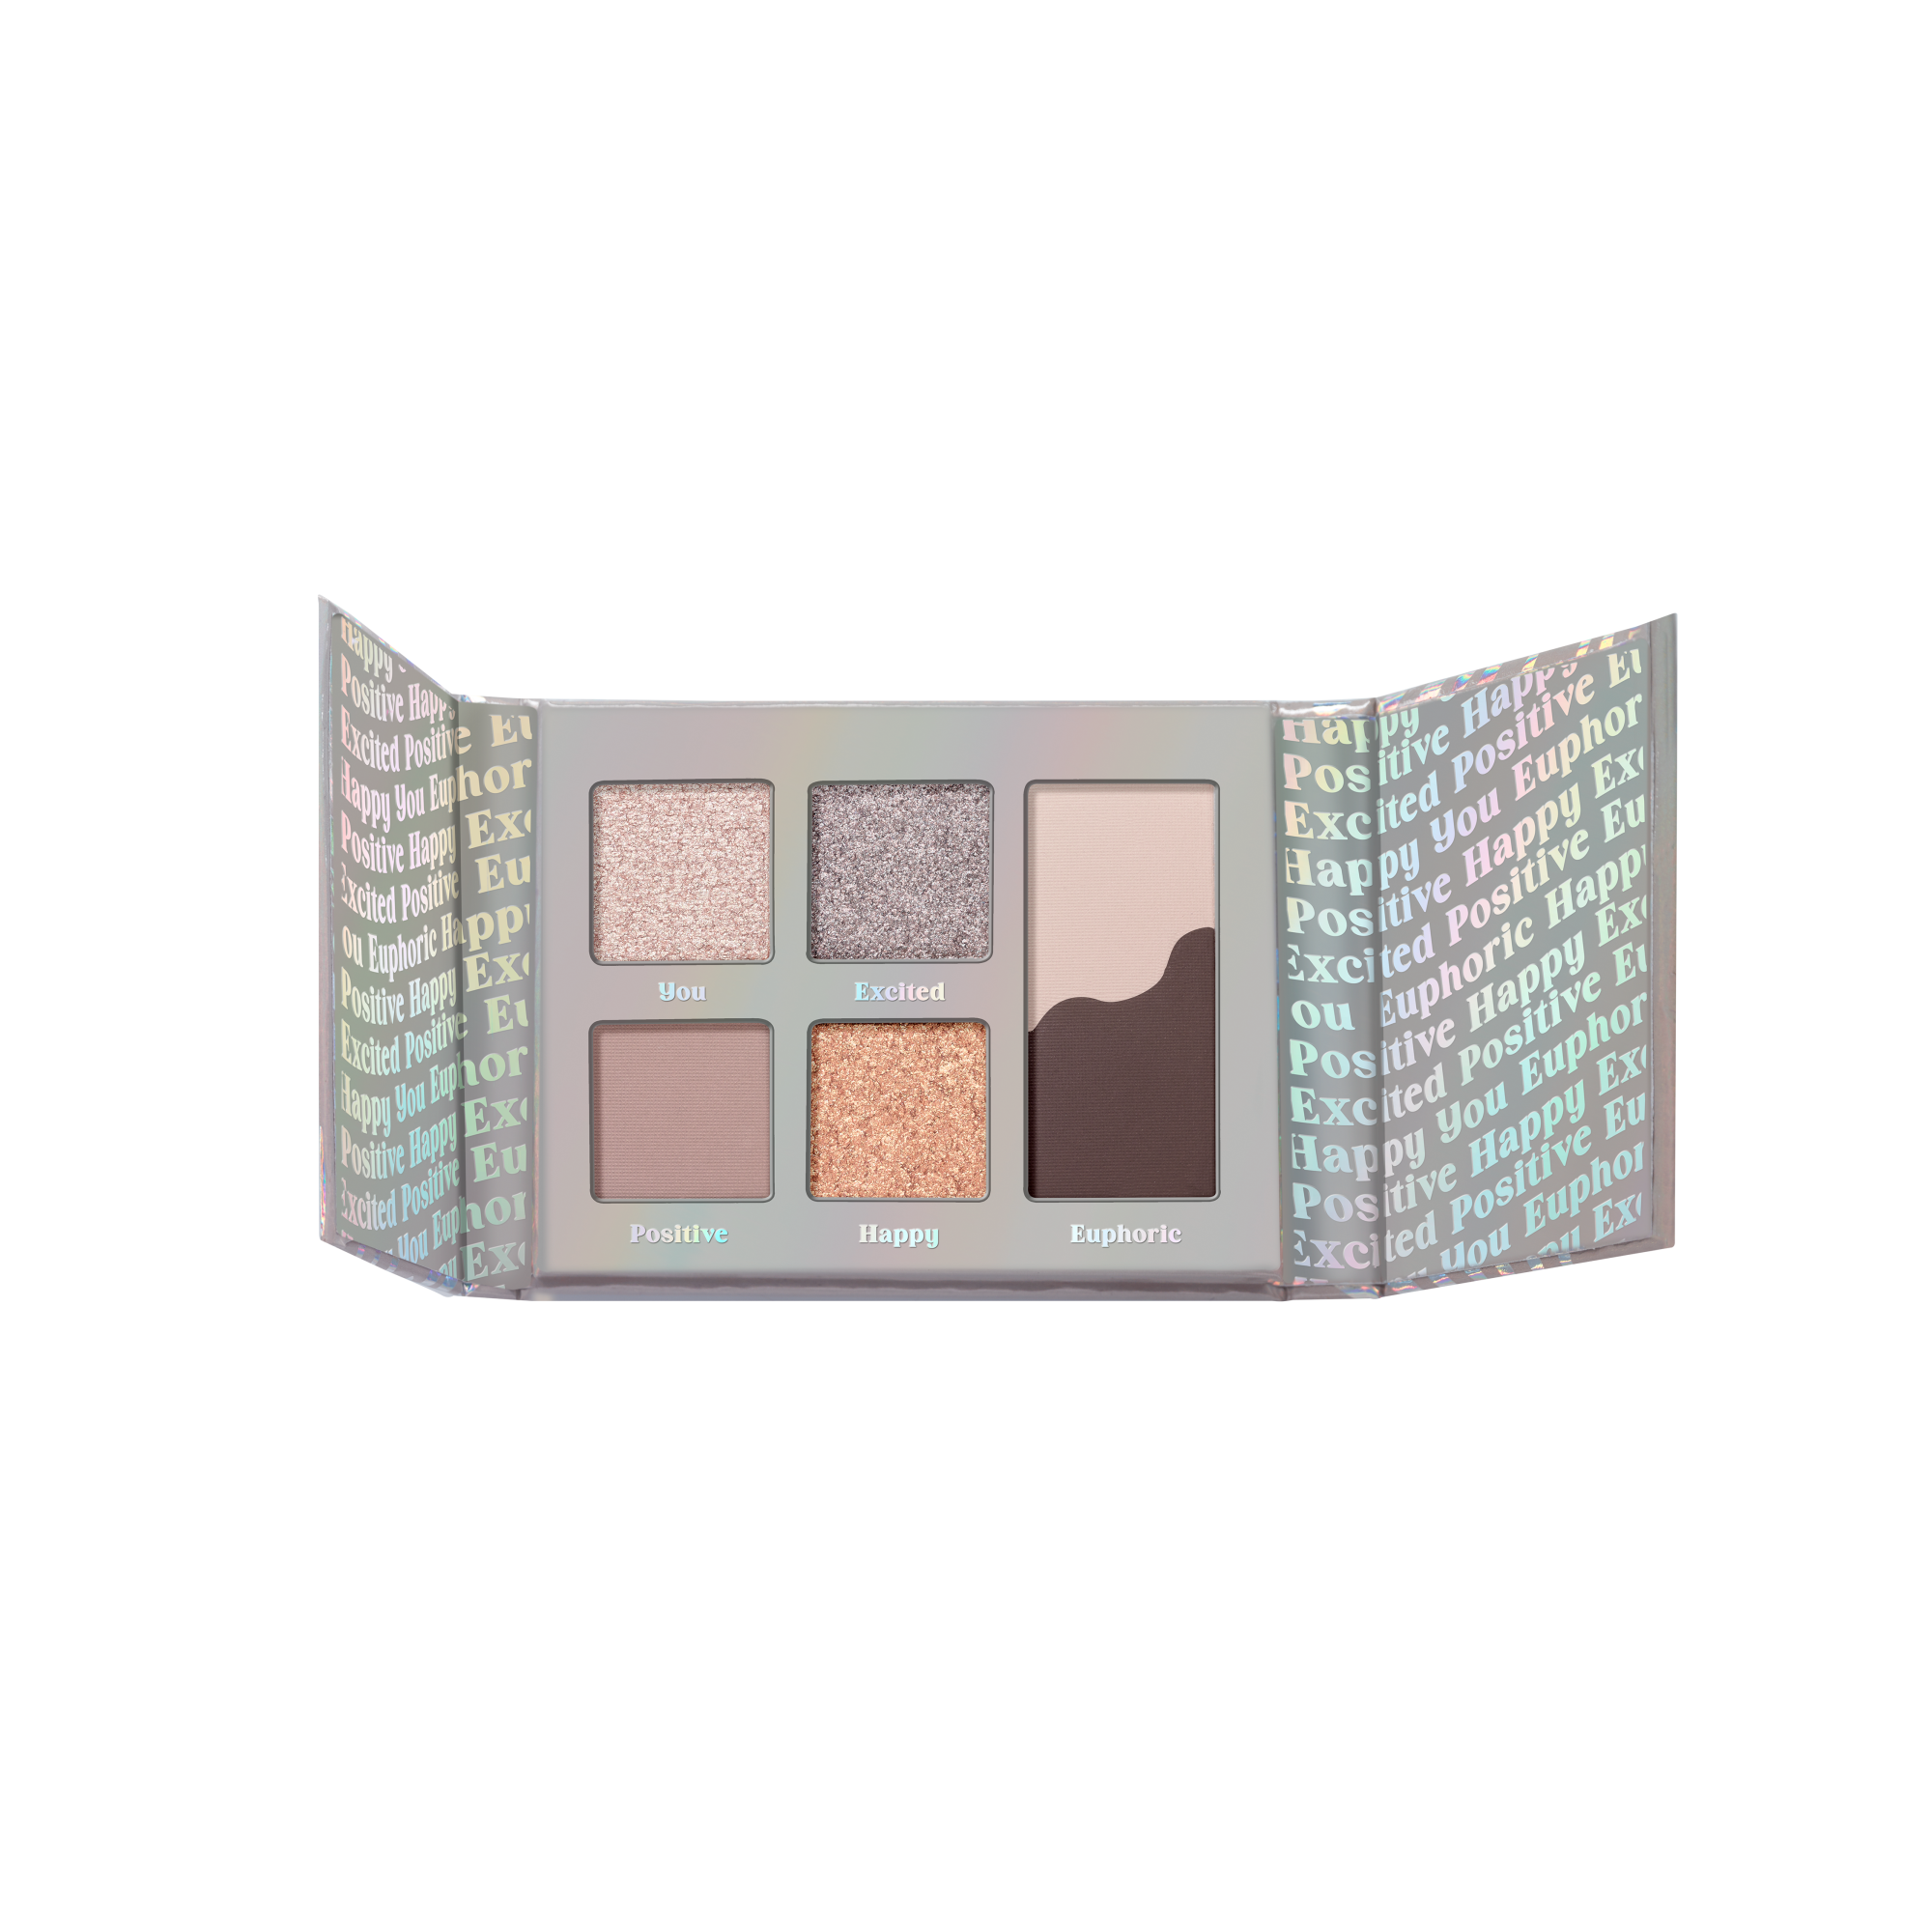 Don't Worry, be... mini eyeshadow palette